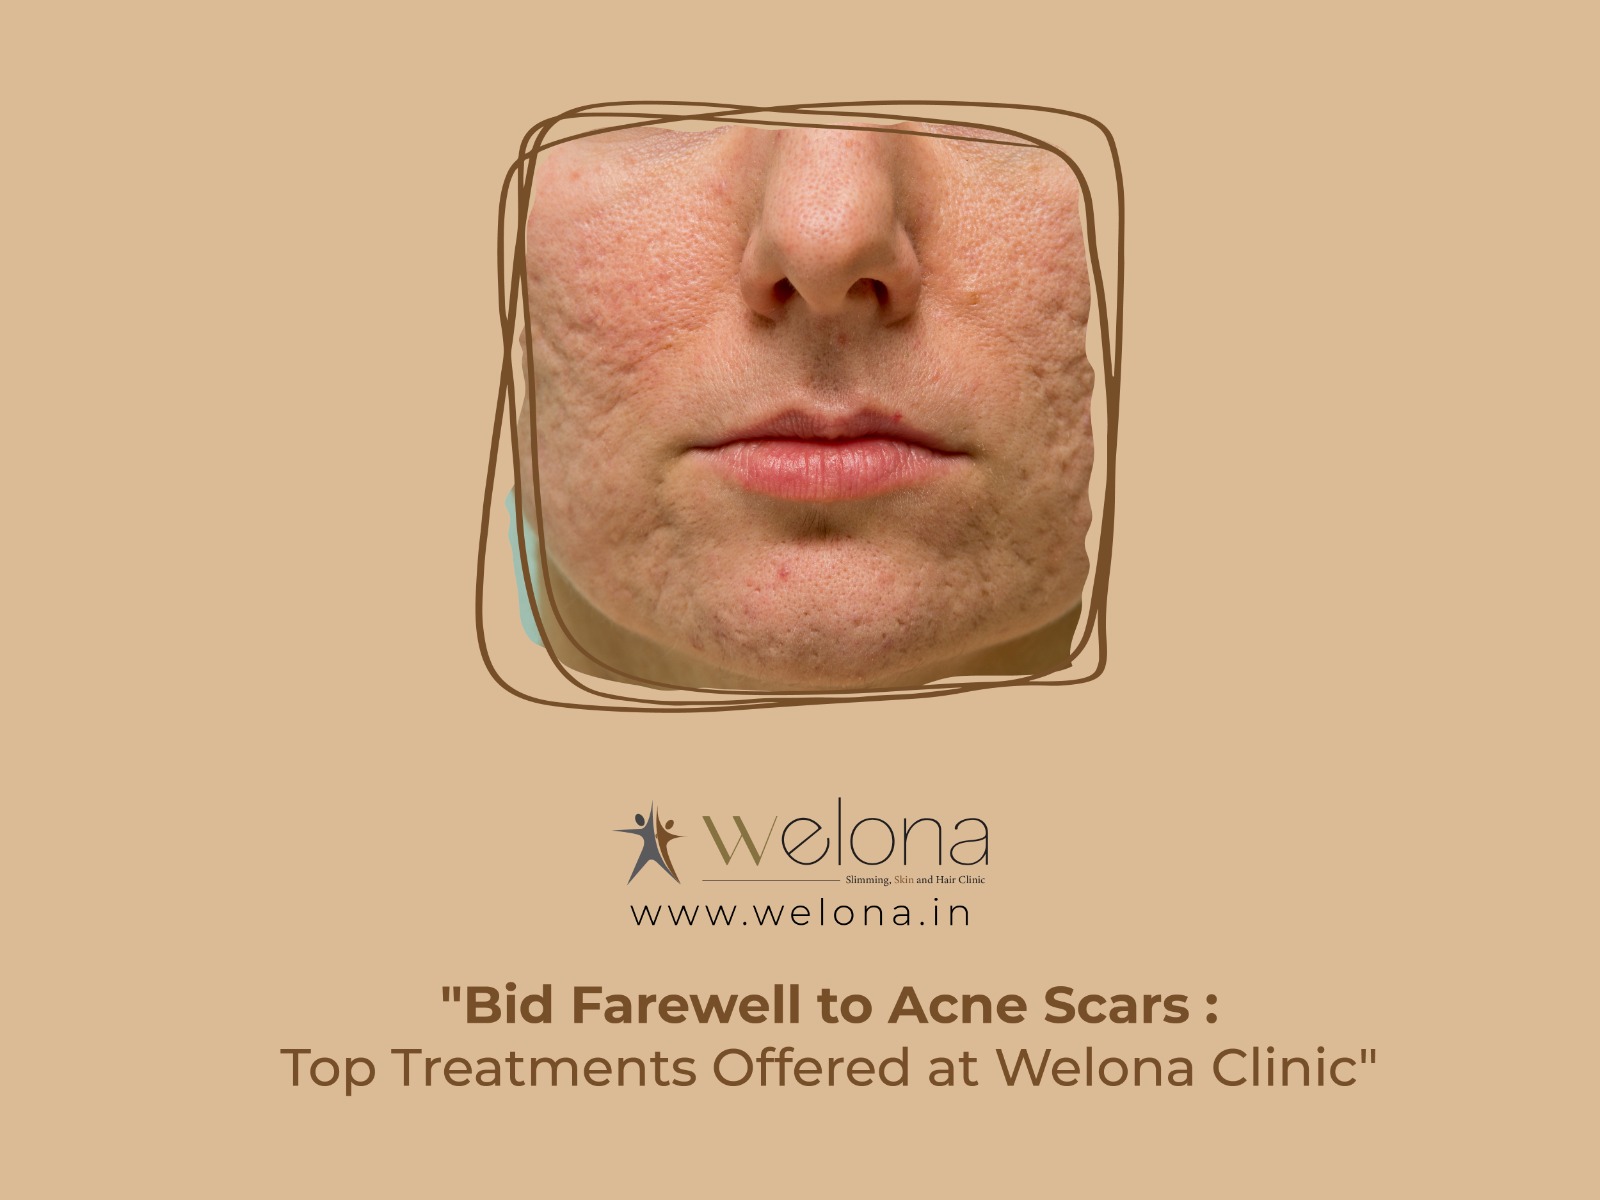 Bid Farewell to Acne Scars: Top Treatments Offered at Welona Clinic